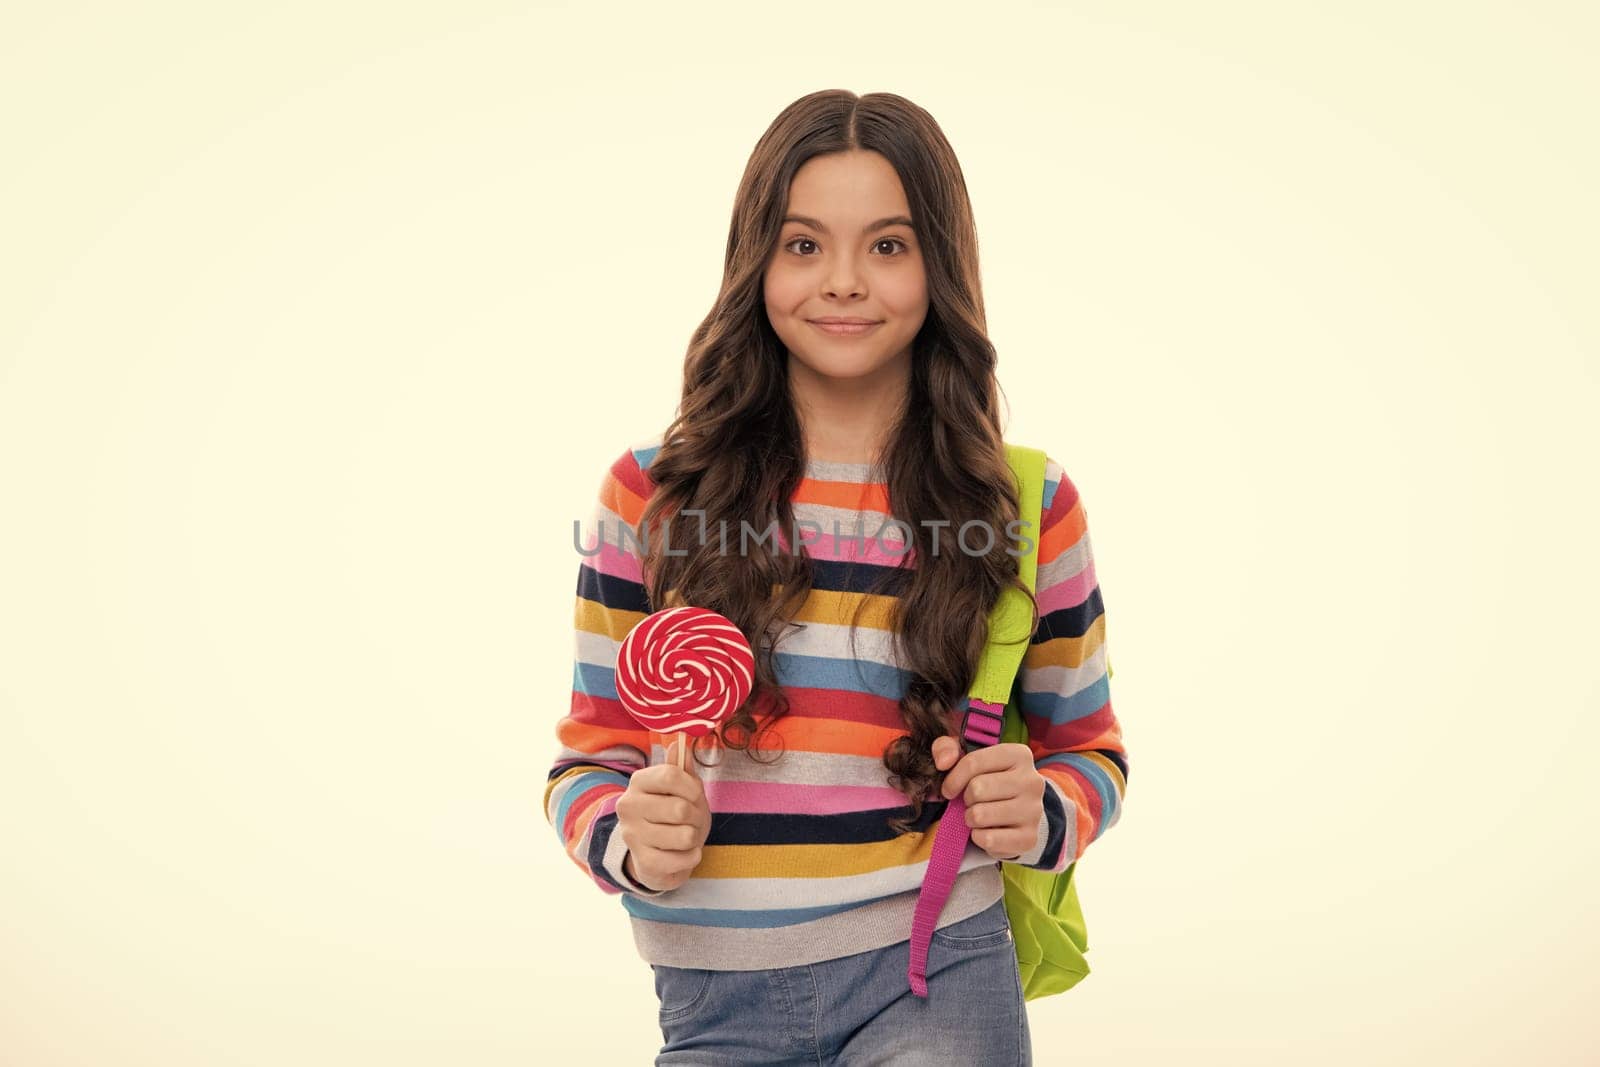 Cool teen child with lollipop over white isolated background. Sweet childhood life. Teen girl with yummy lollipop candy. Happy girl face, positive and smiling emotions